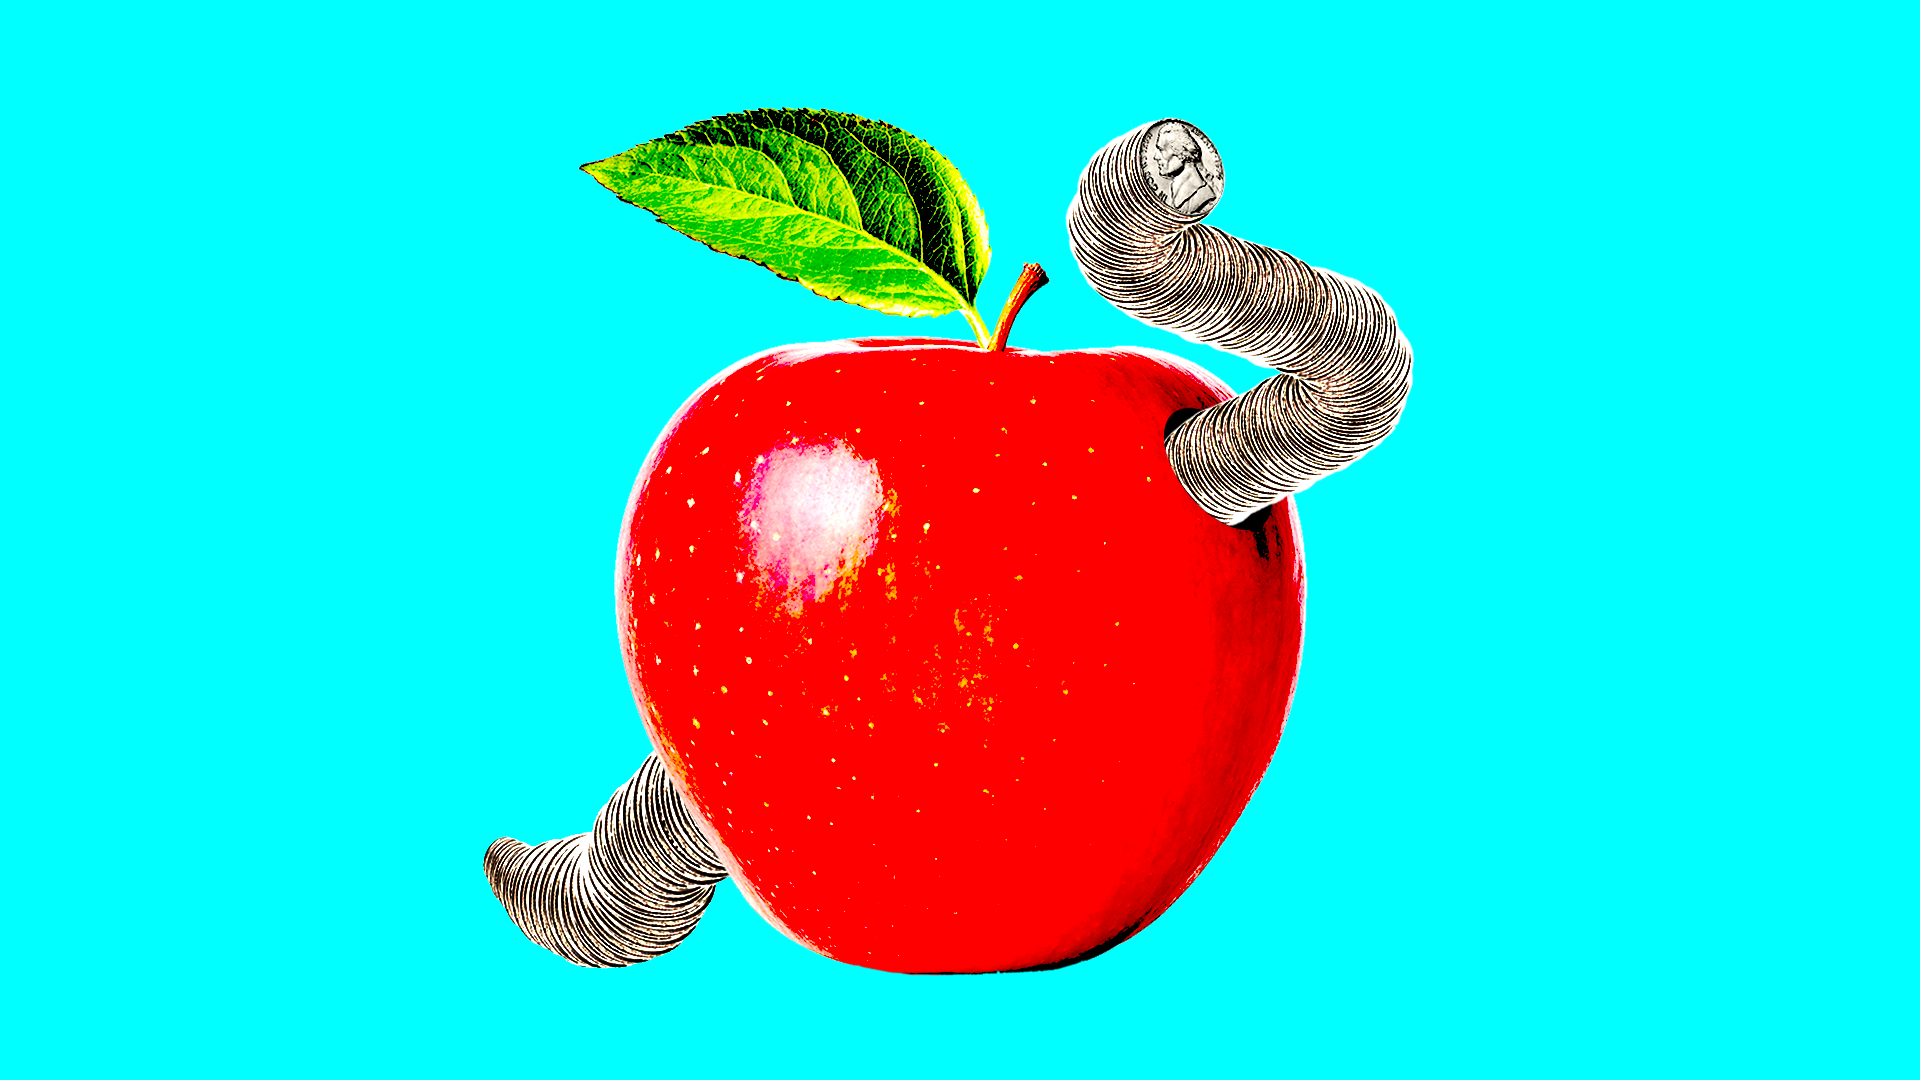 Red apple with worm in it